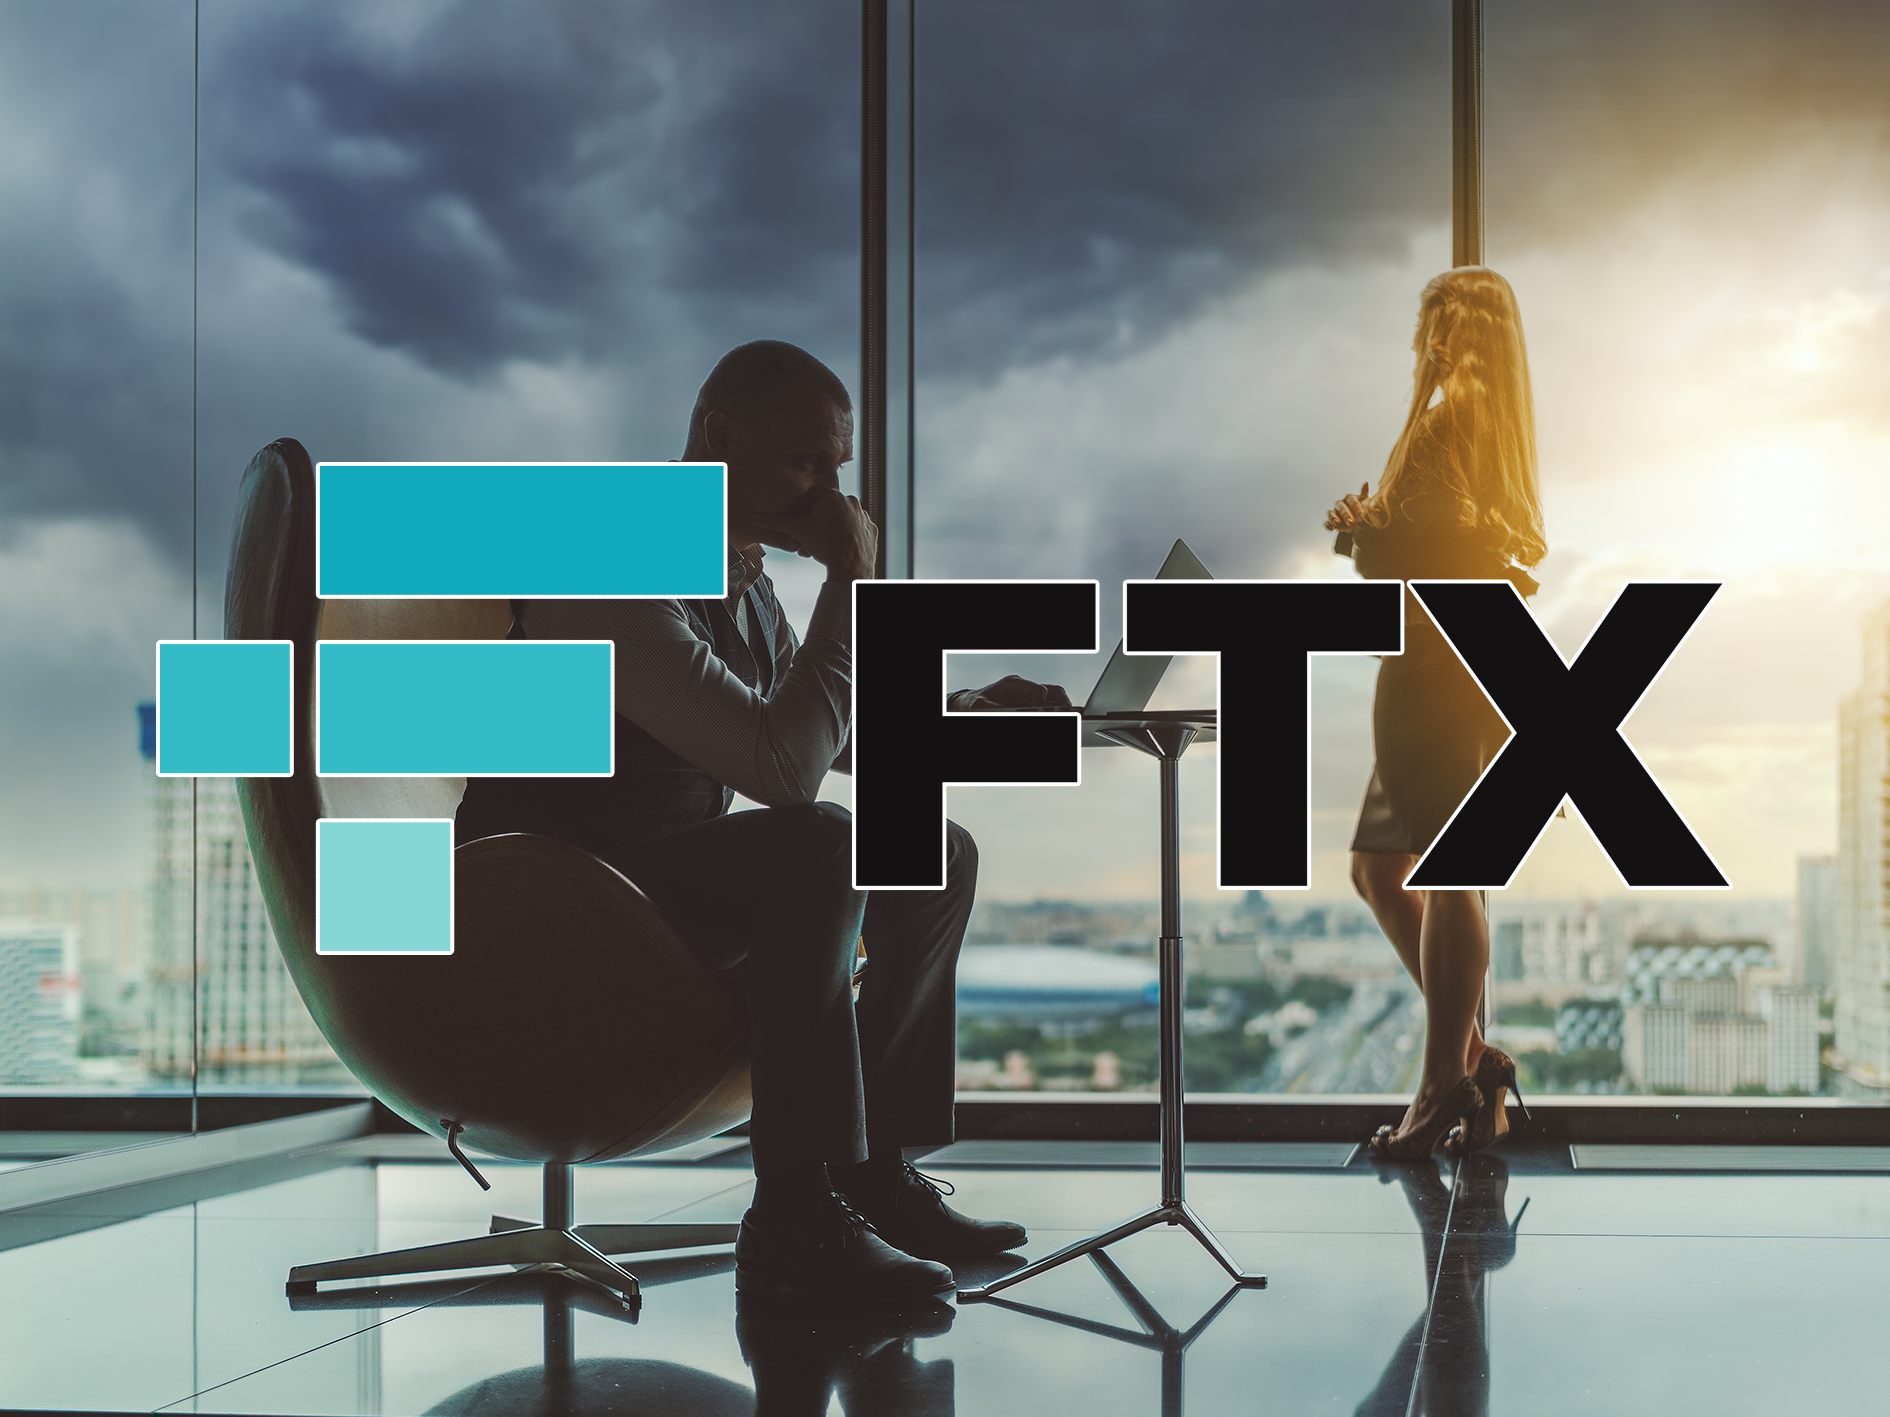 ftx logo and office background